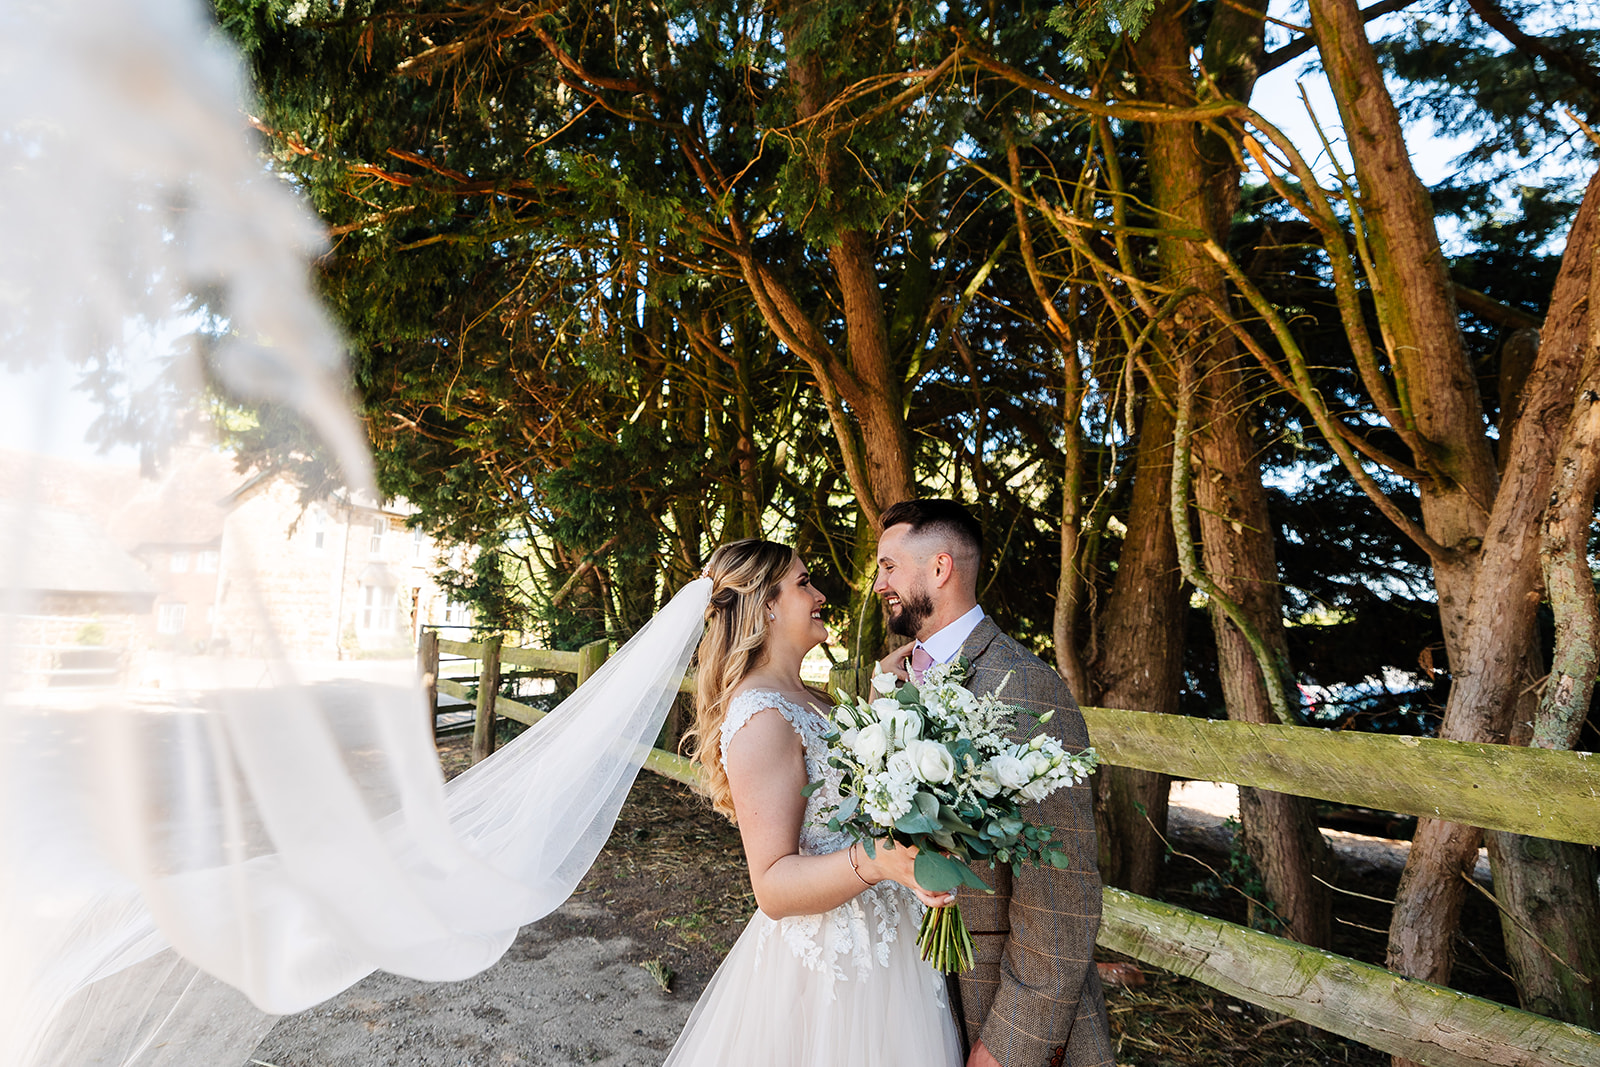 Couple share gaze Infront of forest area with brides veil blowing in the win